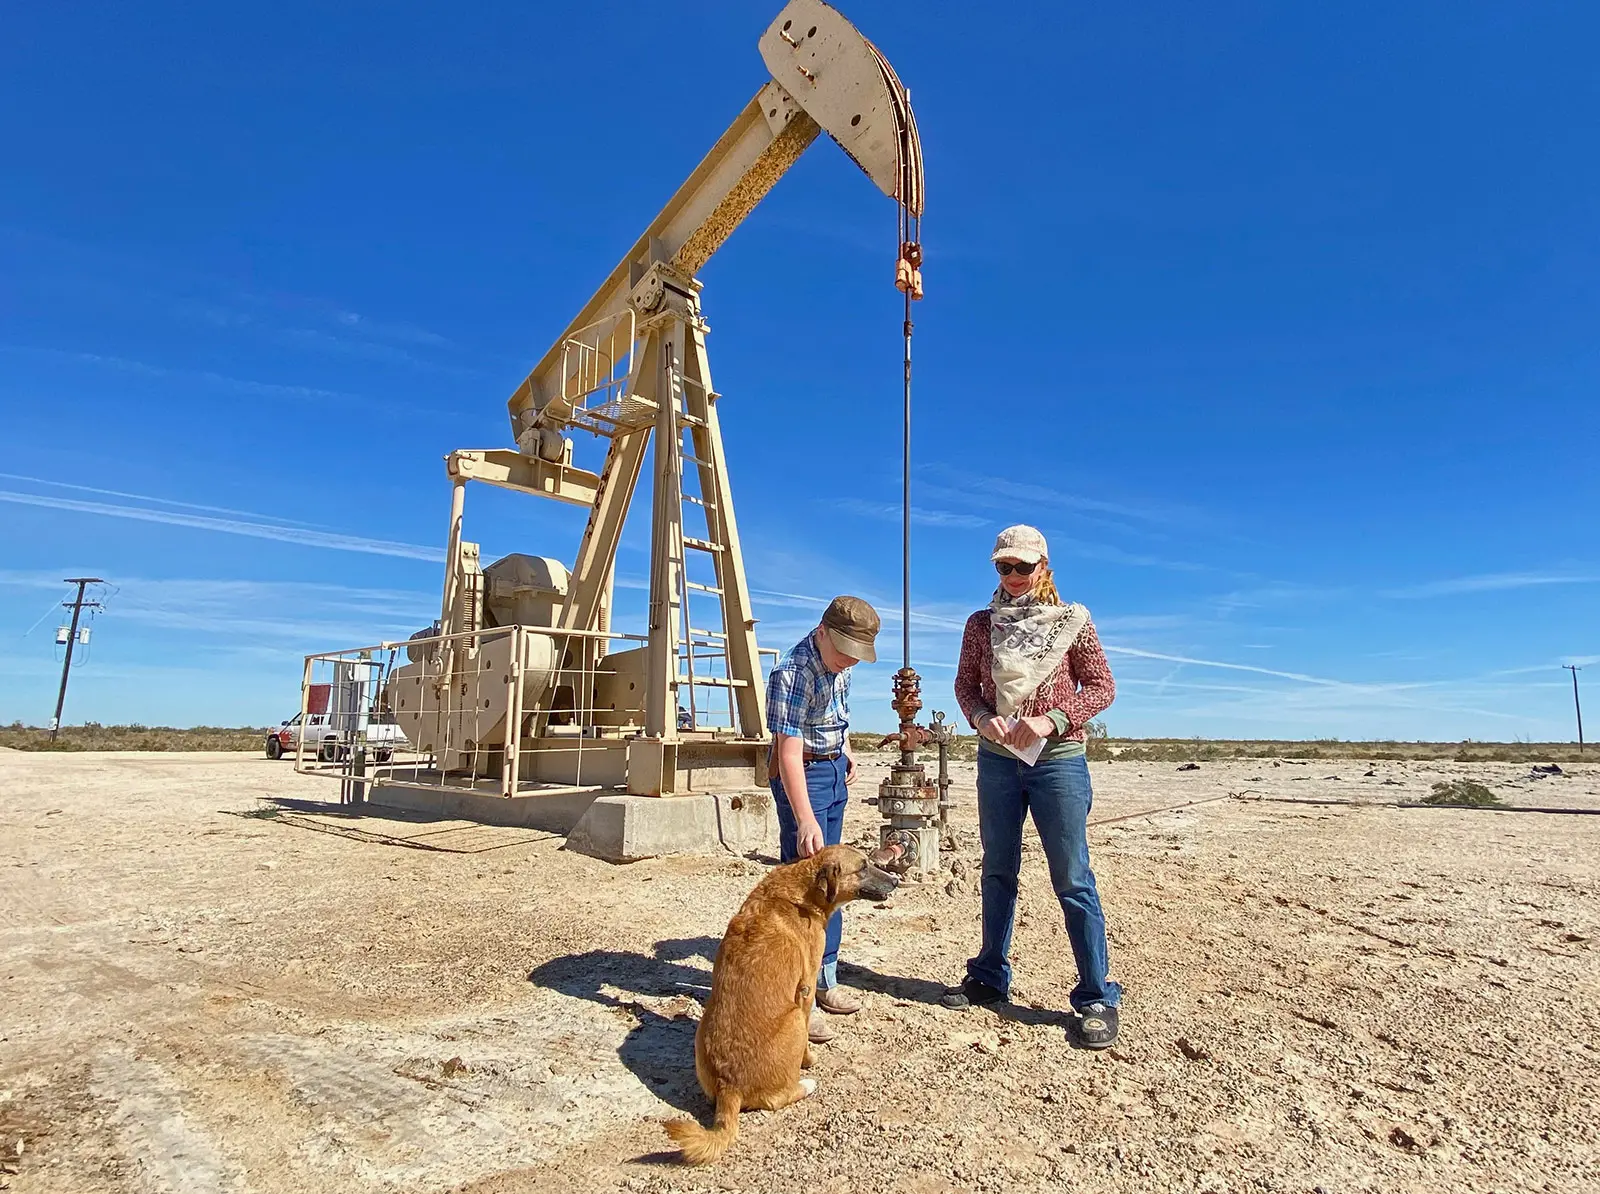 Two people and a dog stand in front of a well with extraction machinery.